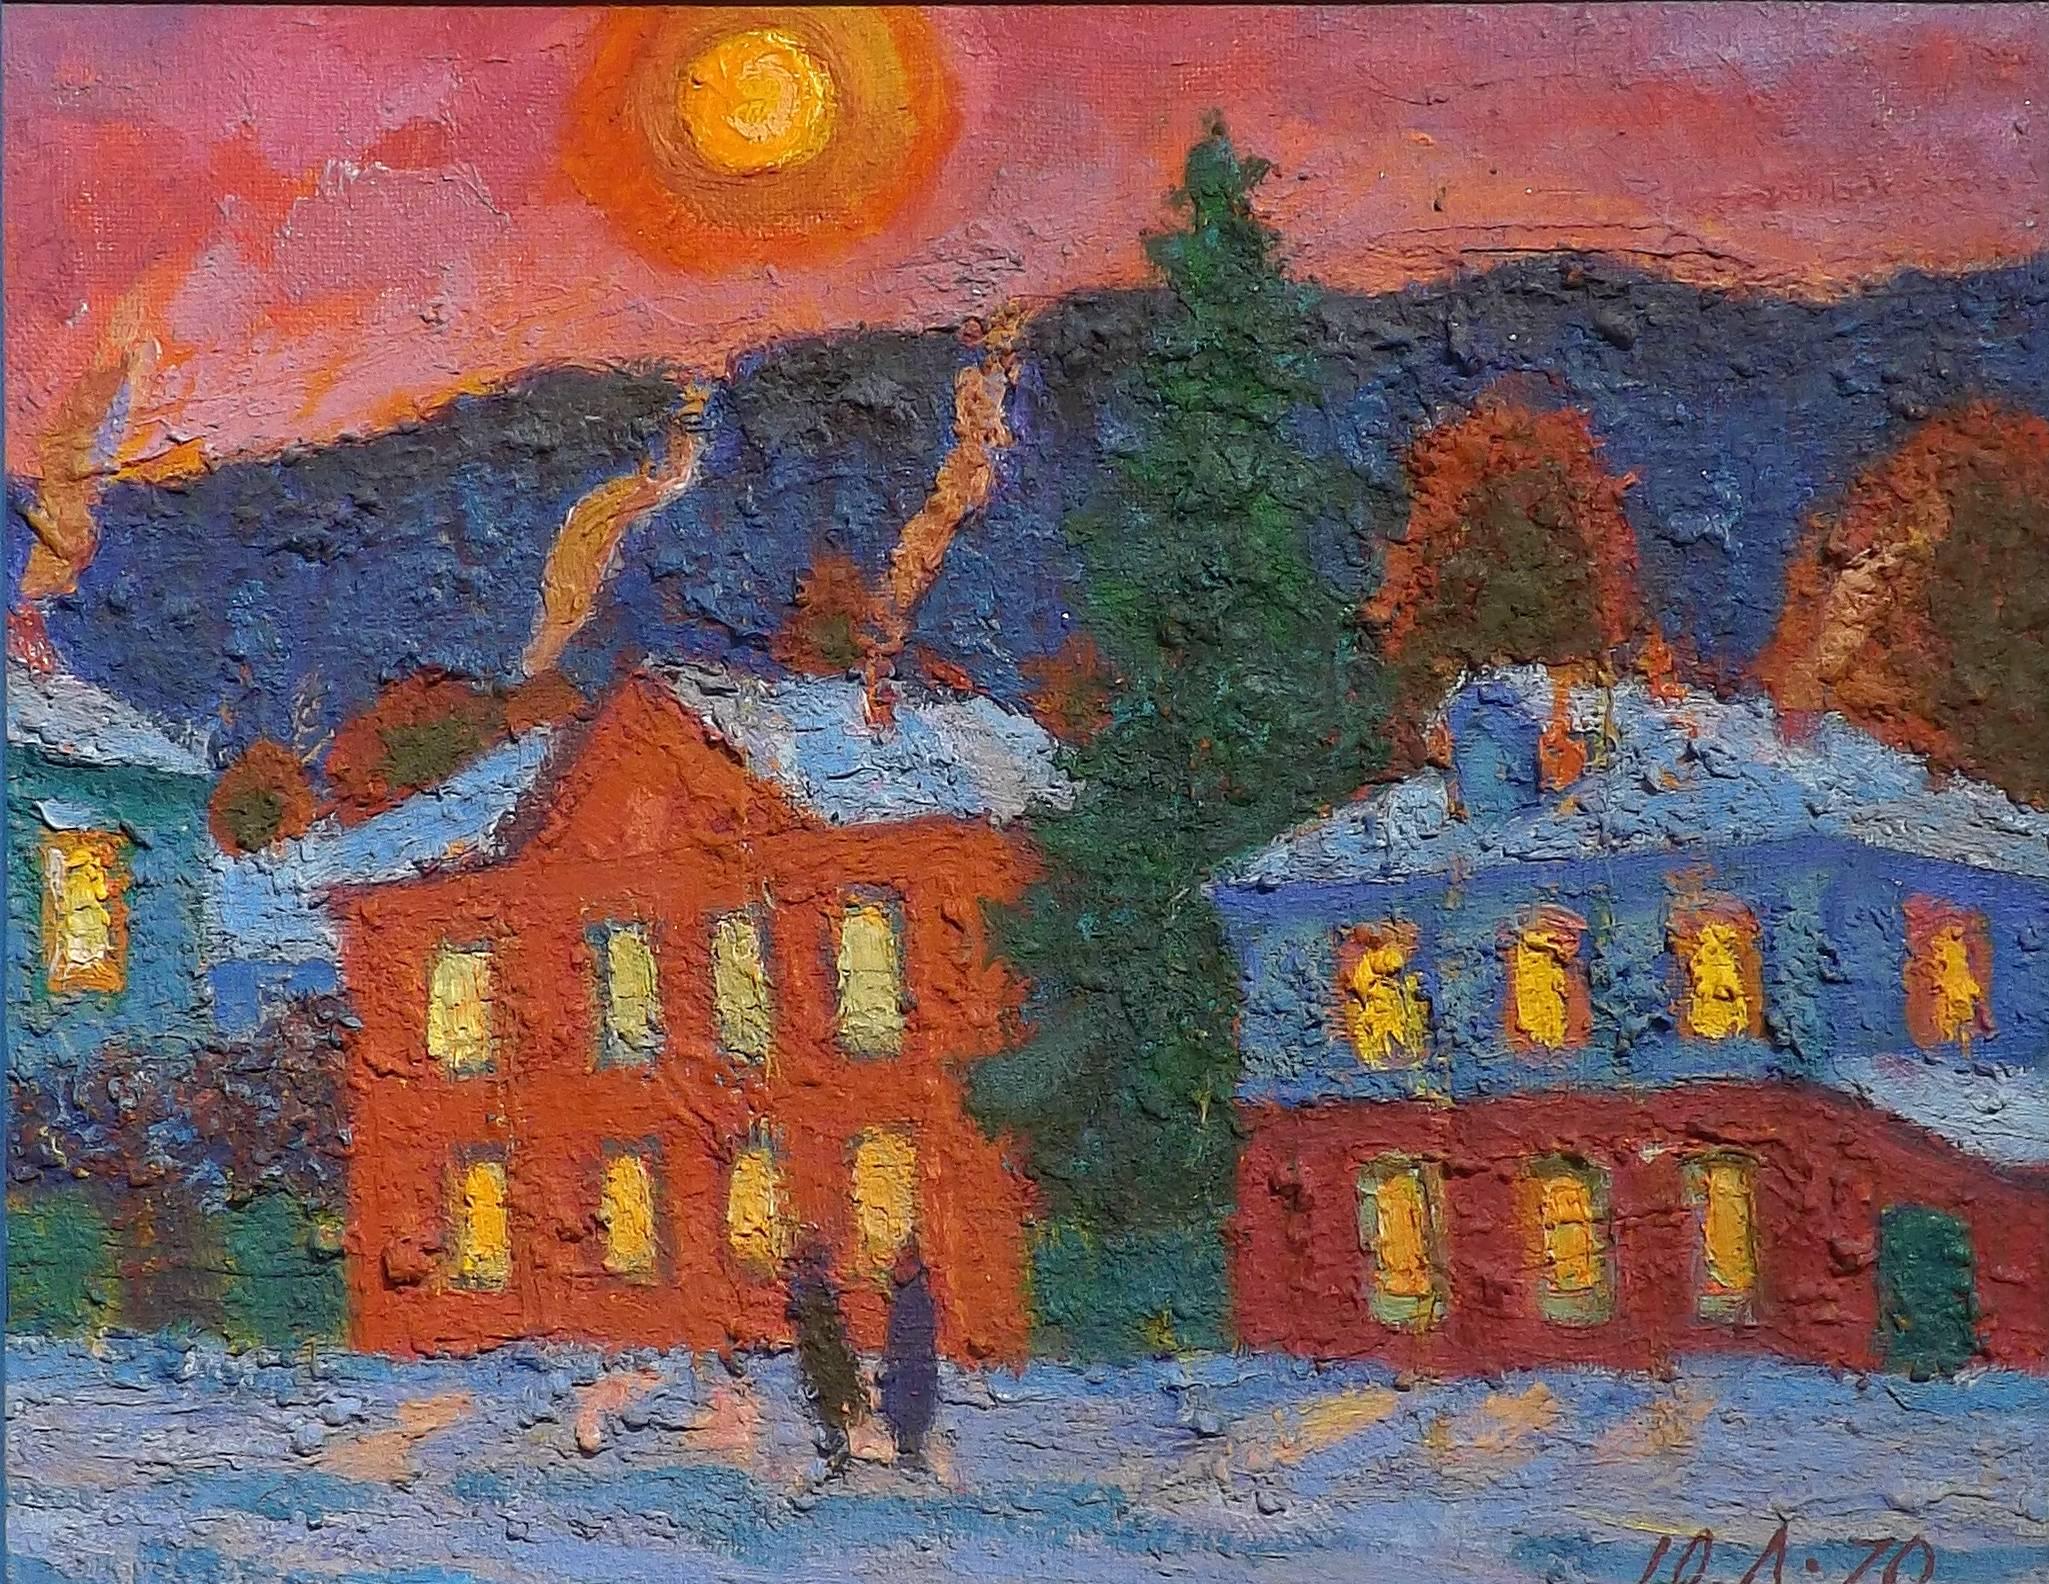 A bright and colorful painting of a snowy village below a bright setting sun, with the smoke from chimneys rise up towards it. A tall pine tree also rises up, painted in the thick heavy paint known to artists from the Russian Vladimir School. Two